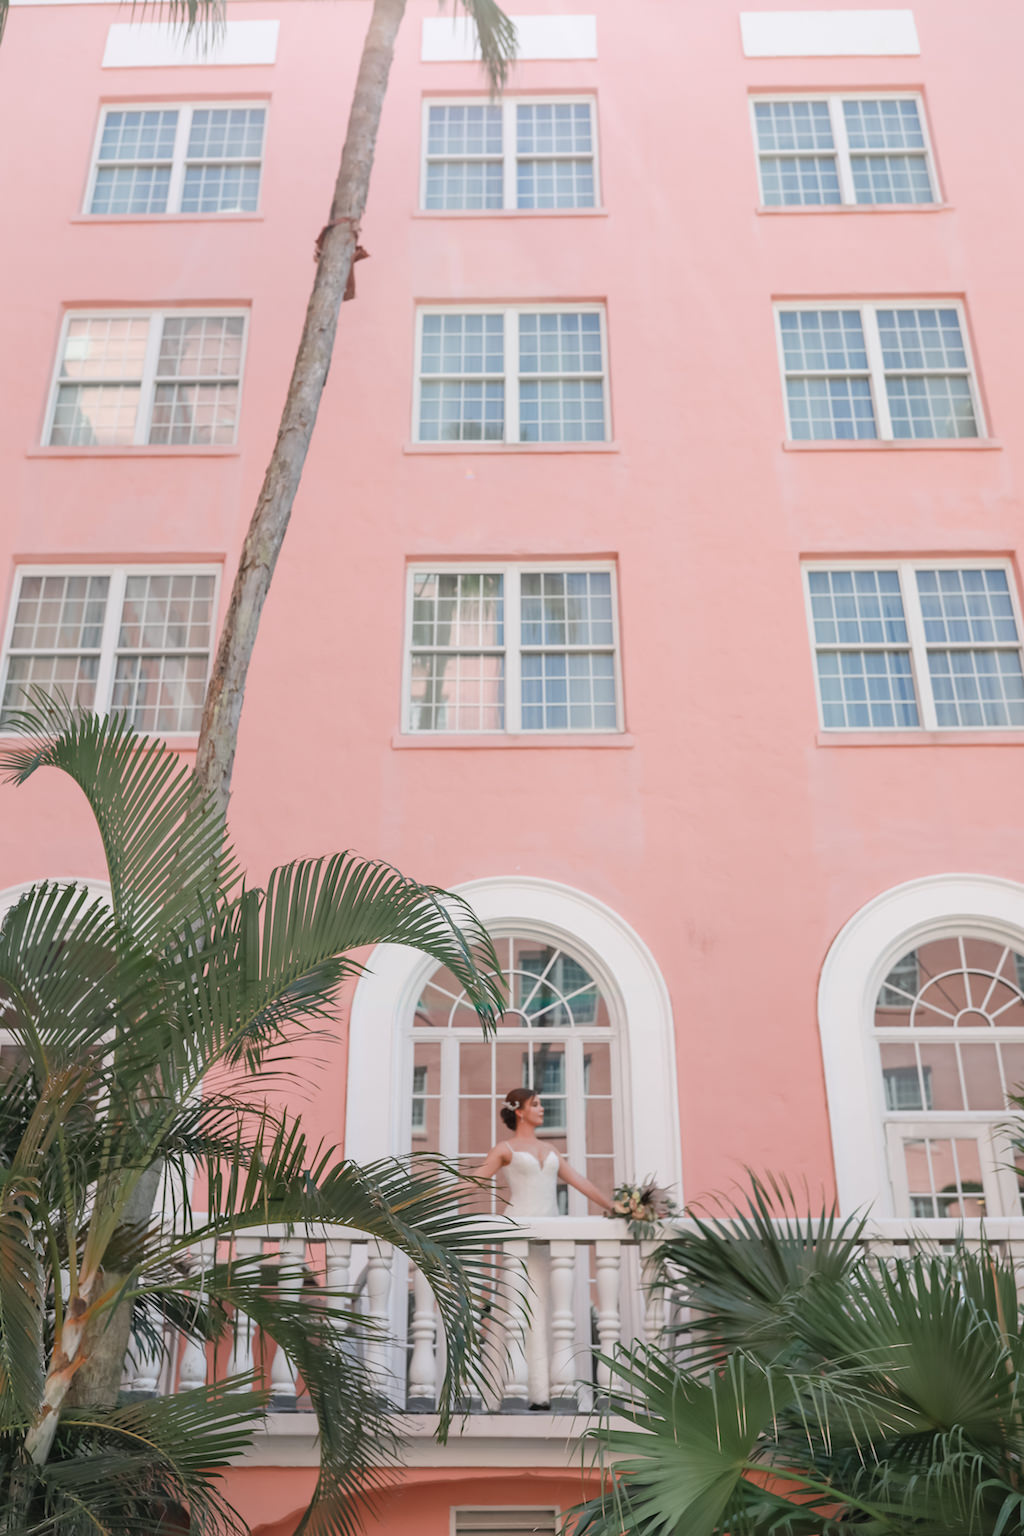 Bride in Wedding Dress by Truly Forever Bridal on Balcony | St. Petersburg Photographer Lifelong Photography Studios | St. Petersburg Historic Wedding Venue The Don Cesar | Instagram